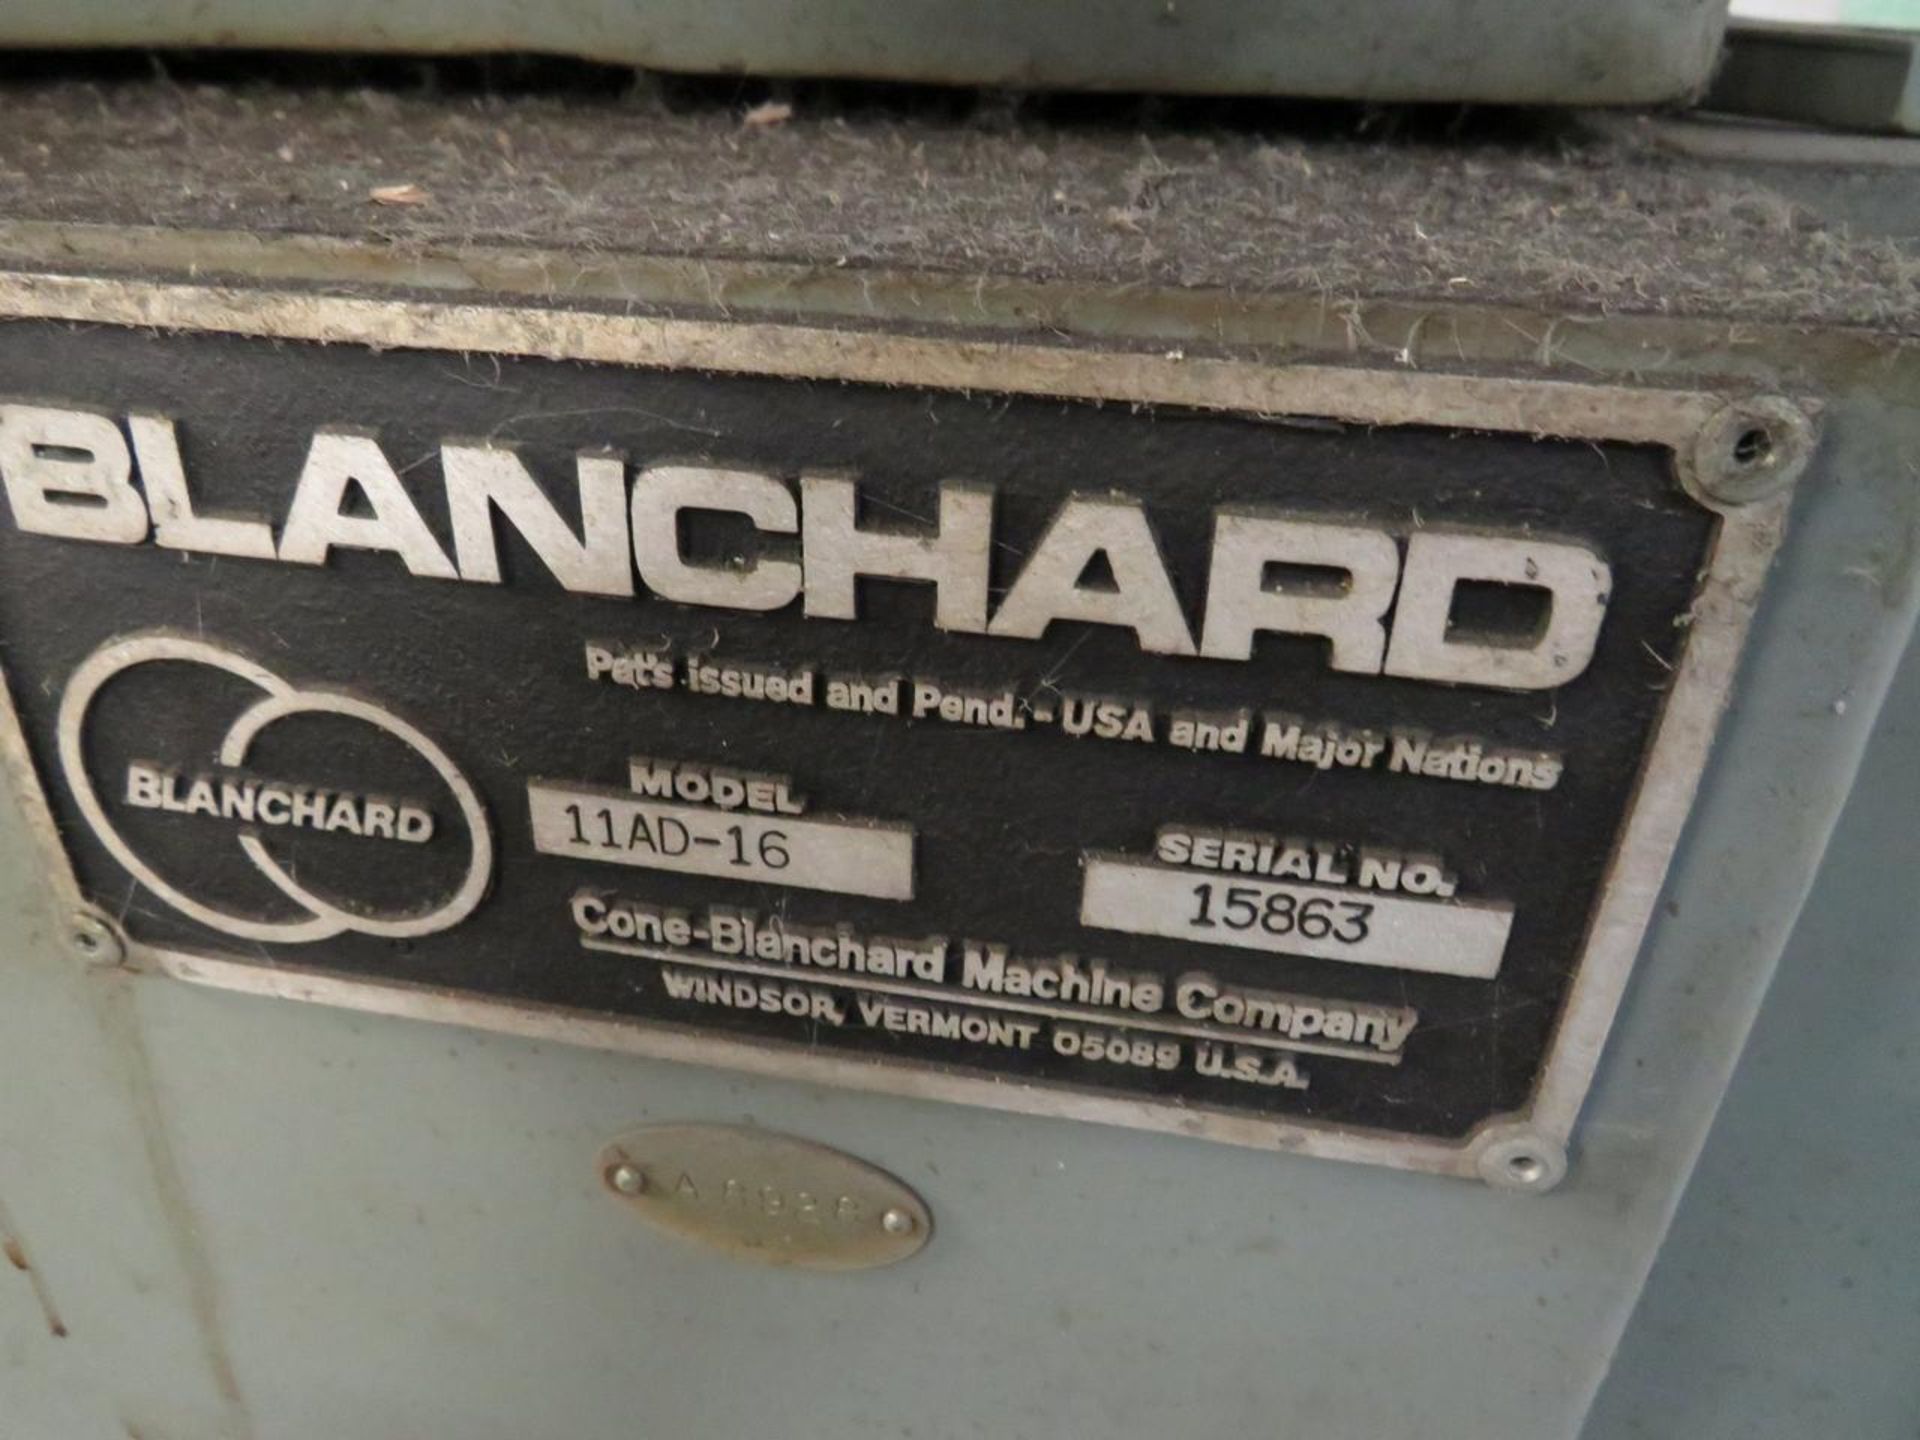 Blanchard 11AD-16 16" Vertical Spindle Rotary Surface Grinder - Image 3 of 12